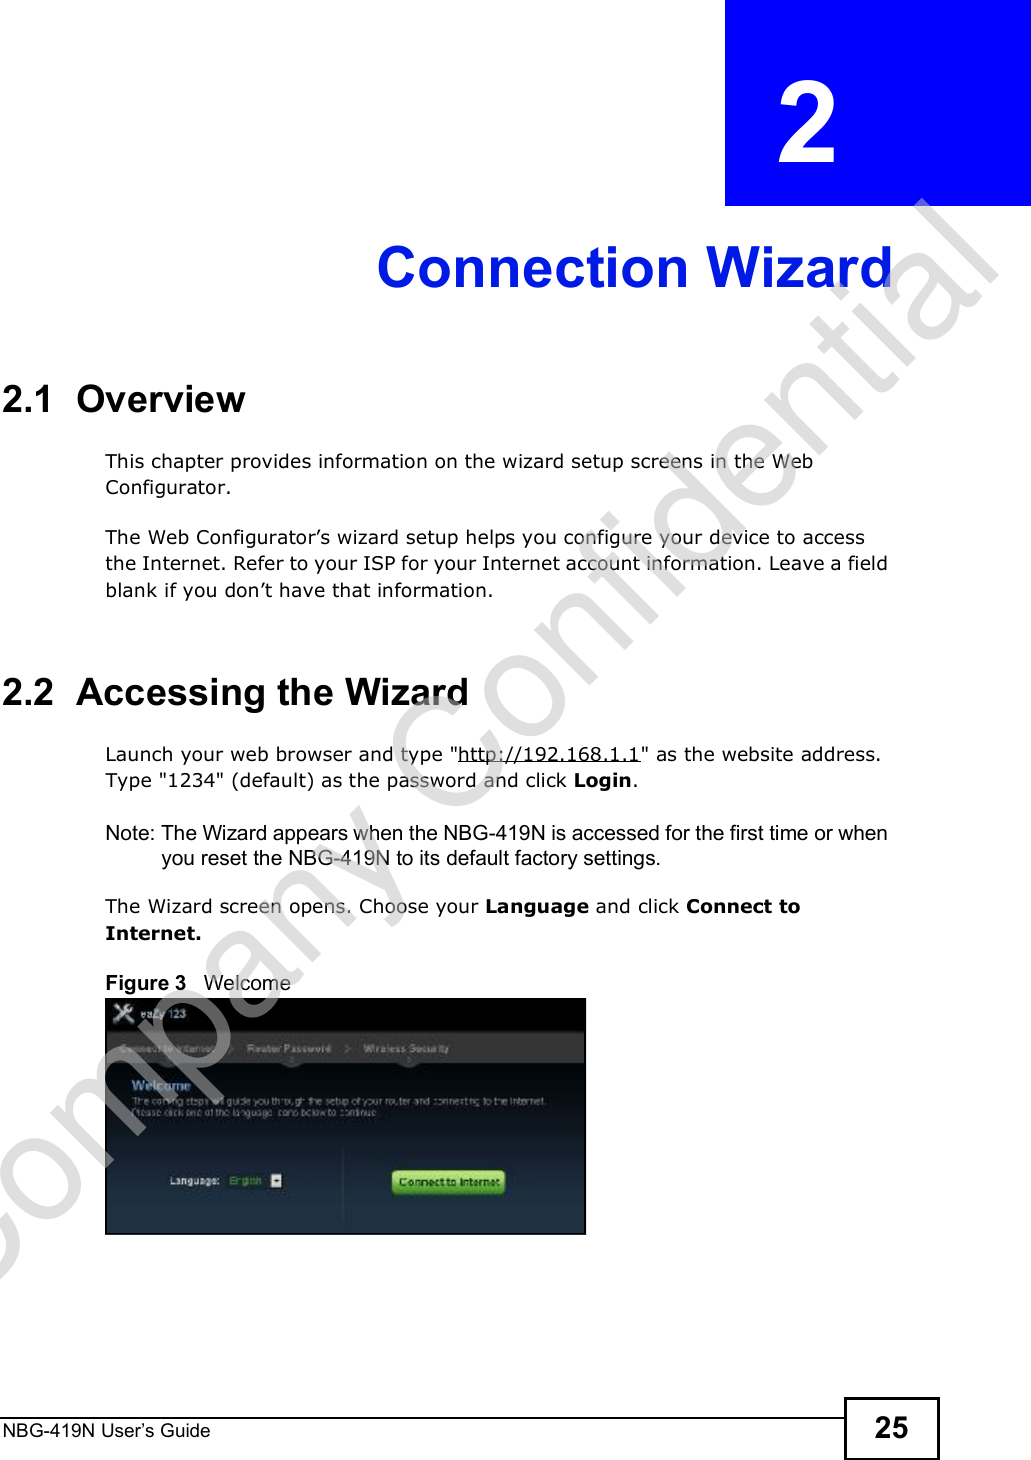 NBG-419N User s Guide 25CHAPTER  2 Connection Wizard2.1  OverviewThis chapter provides information on the wizard setup screens in the Web Configurator.The Web Configurator!s wizard setup helps you configure your device to access the Internet. Refer to your ISP for your Internet account information. Leave a field blank if you don!t have that information.2.2  Accessing the WizardLaunch your web browser and type &quot;http://192.168.1.1&quot; as the website address. Type &quot;1234&quot; (default) as the password and click Login.Note: The Wizard appears when the NBG-419N is accessed for the first time or when you reset the NBG-419N to its default factory settings.The Wizard screen opens. Choose your Language and click Connect to Internet.Figure 3   Welcome Company Confidential